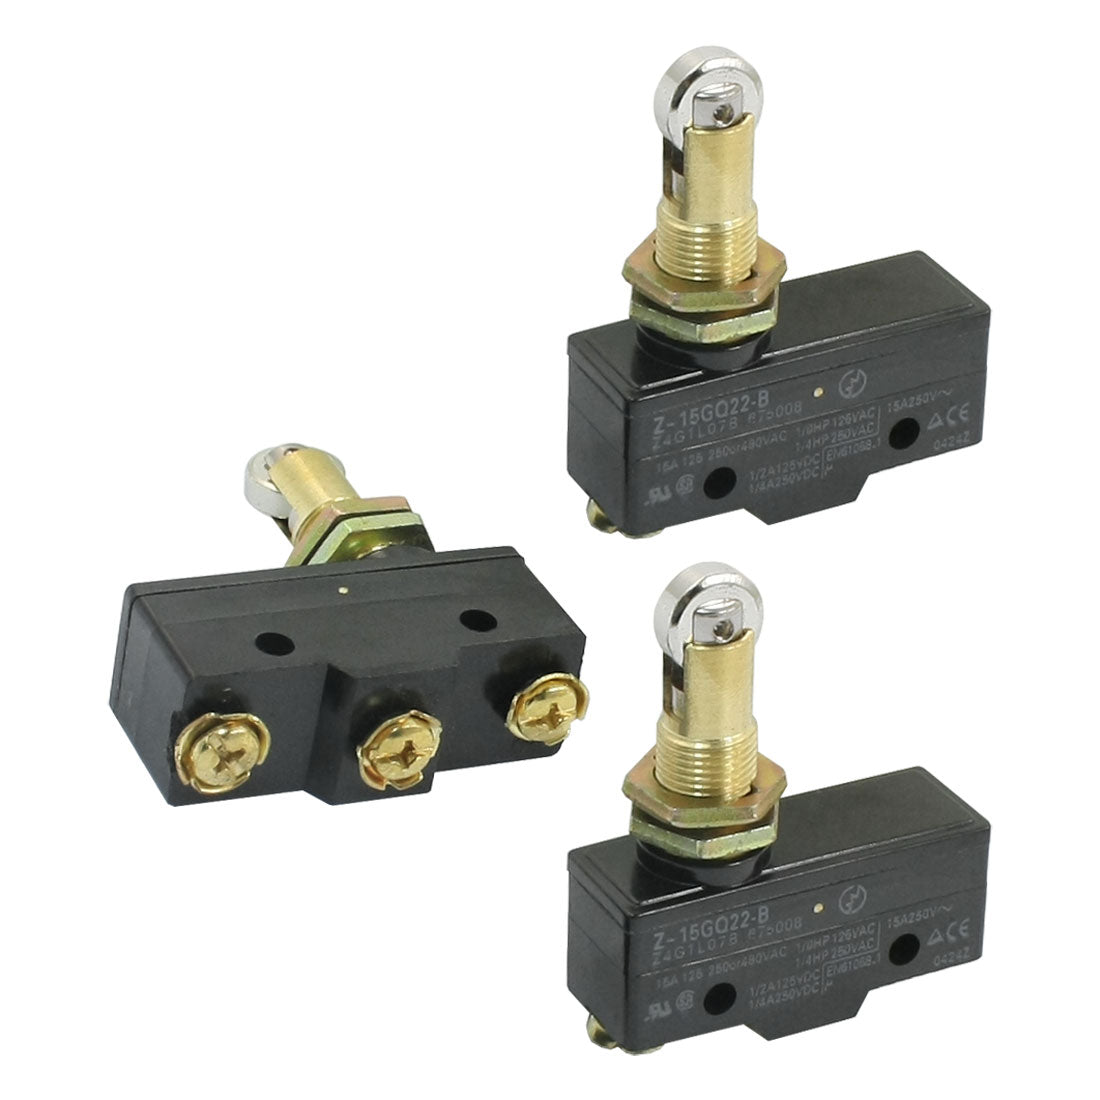 uxcell Uxcell 3pcs Z-15GQ22-B AC 125V/250V/480V 15A 3 Terminals SPSD 1NO 1NC Panel Mount Roller Plunger Basic Limit Switch 12mm Thread